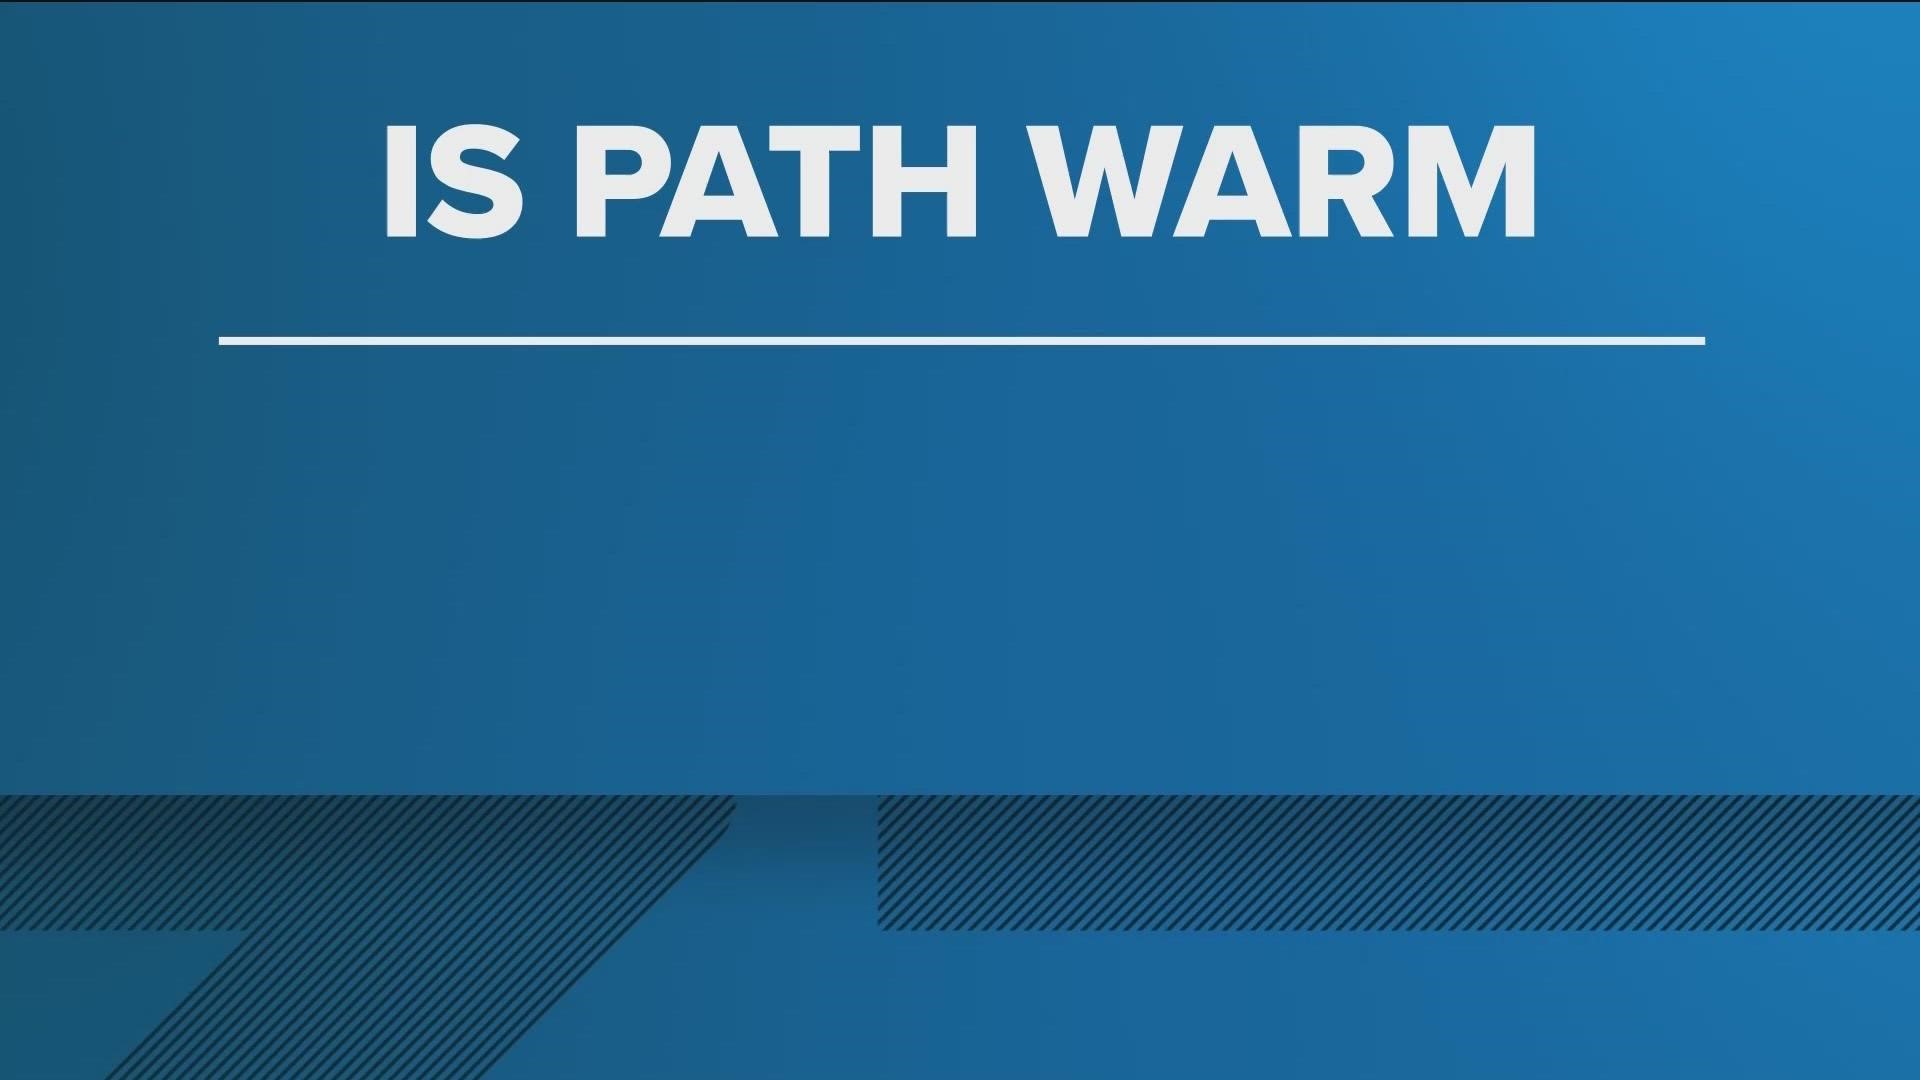 Andrea Mata, a clinical child psychologist, said the phrase "Is Path Warm" abbreviates multiple warning signs people should look out for